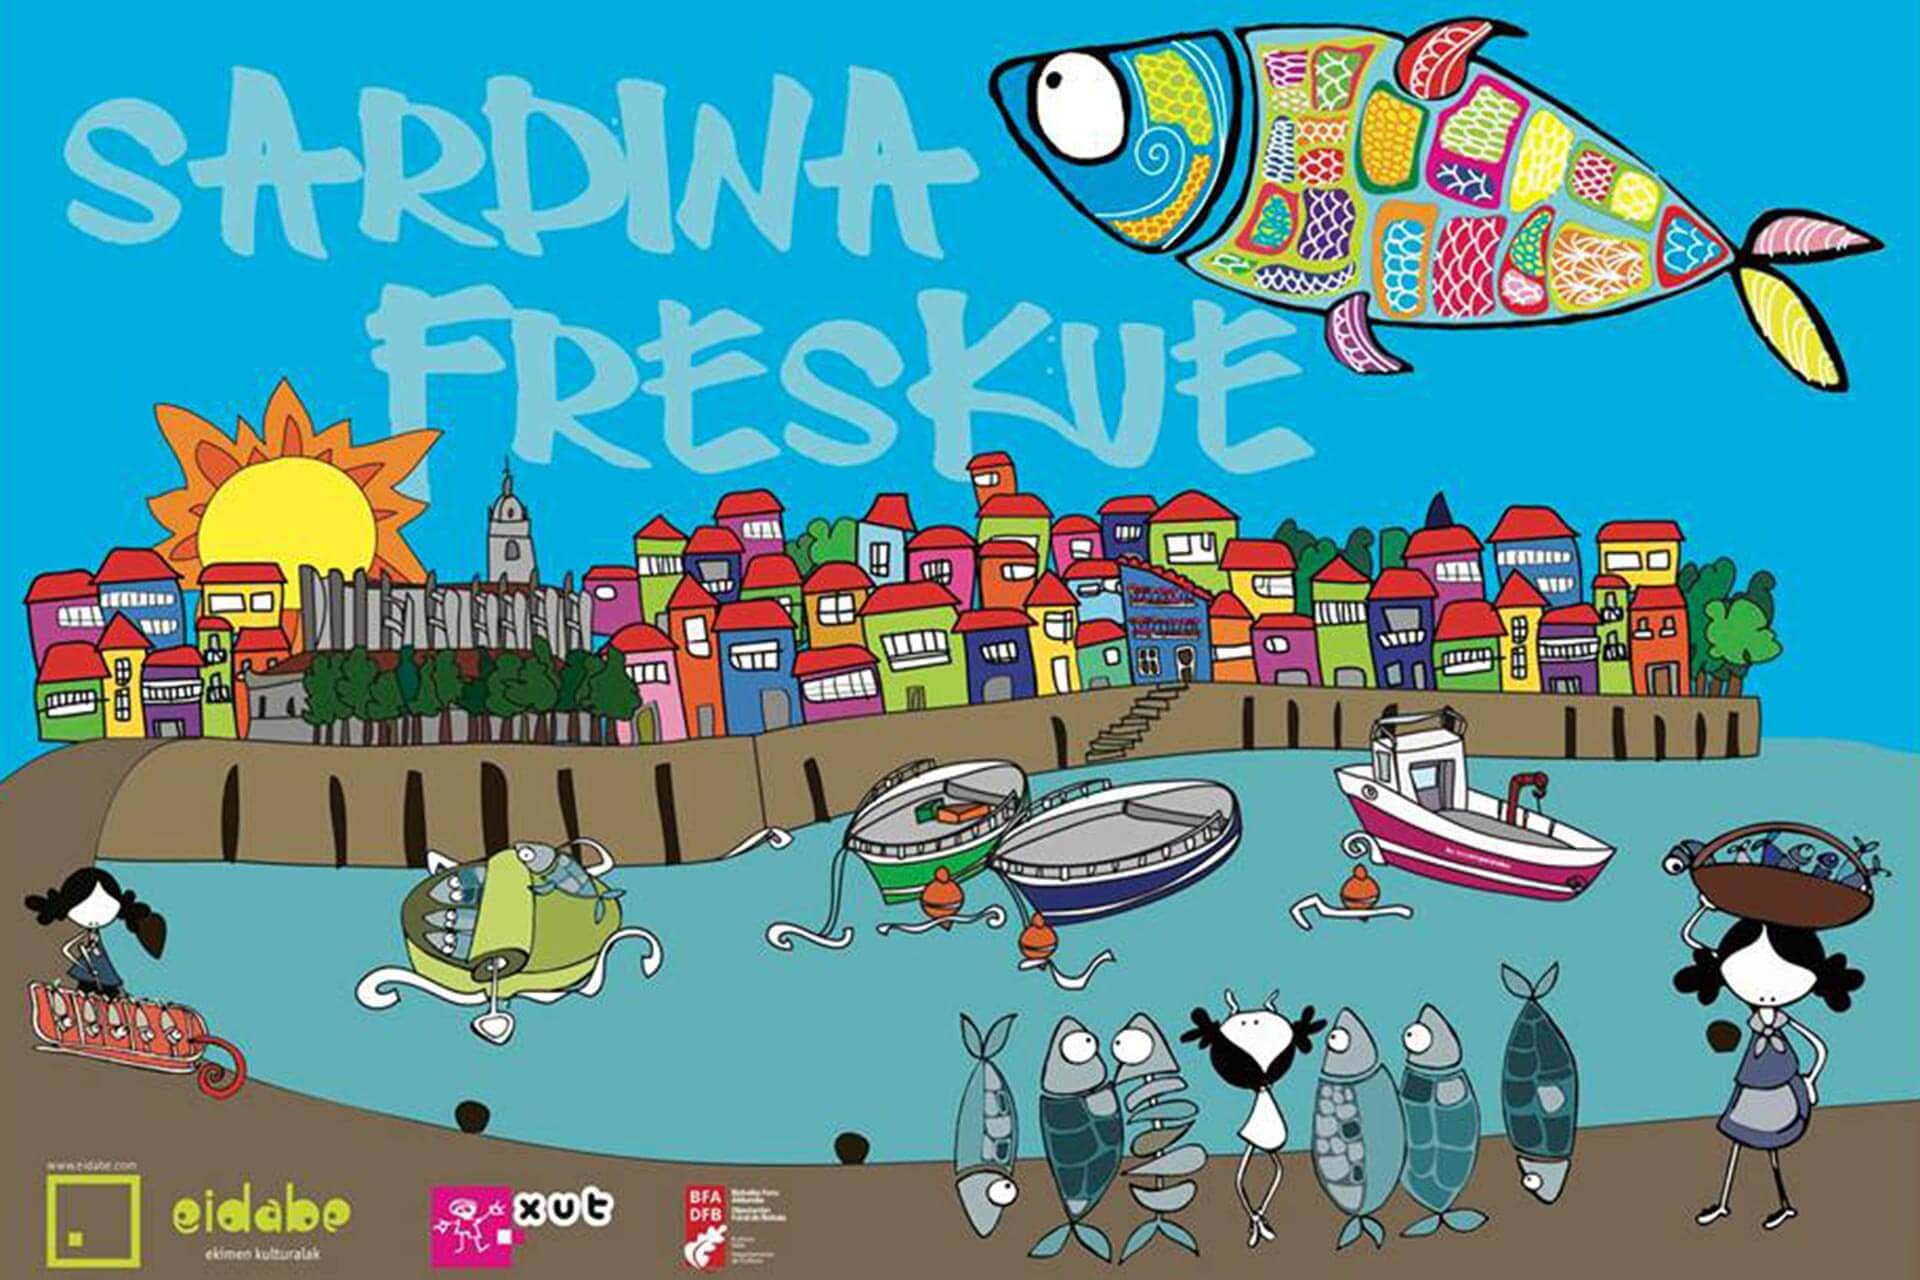 “Sardina Freskue” poster and theatrical elements